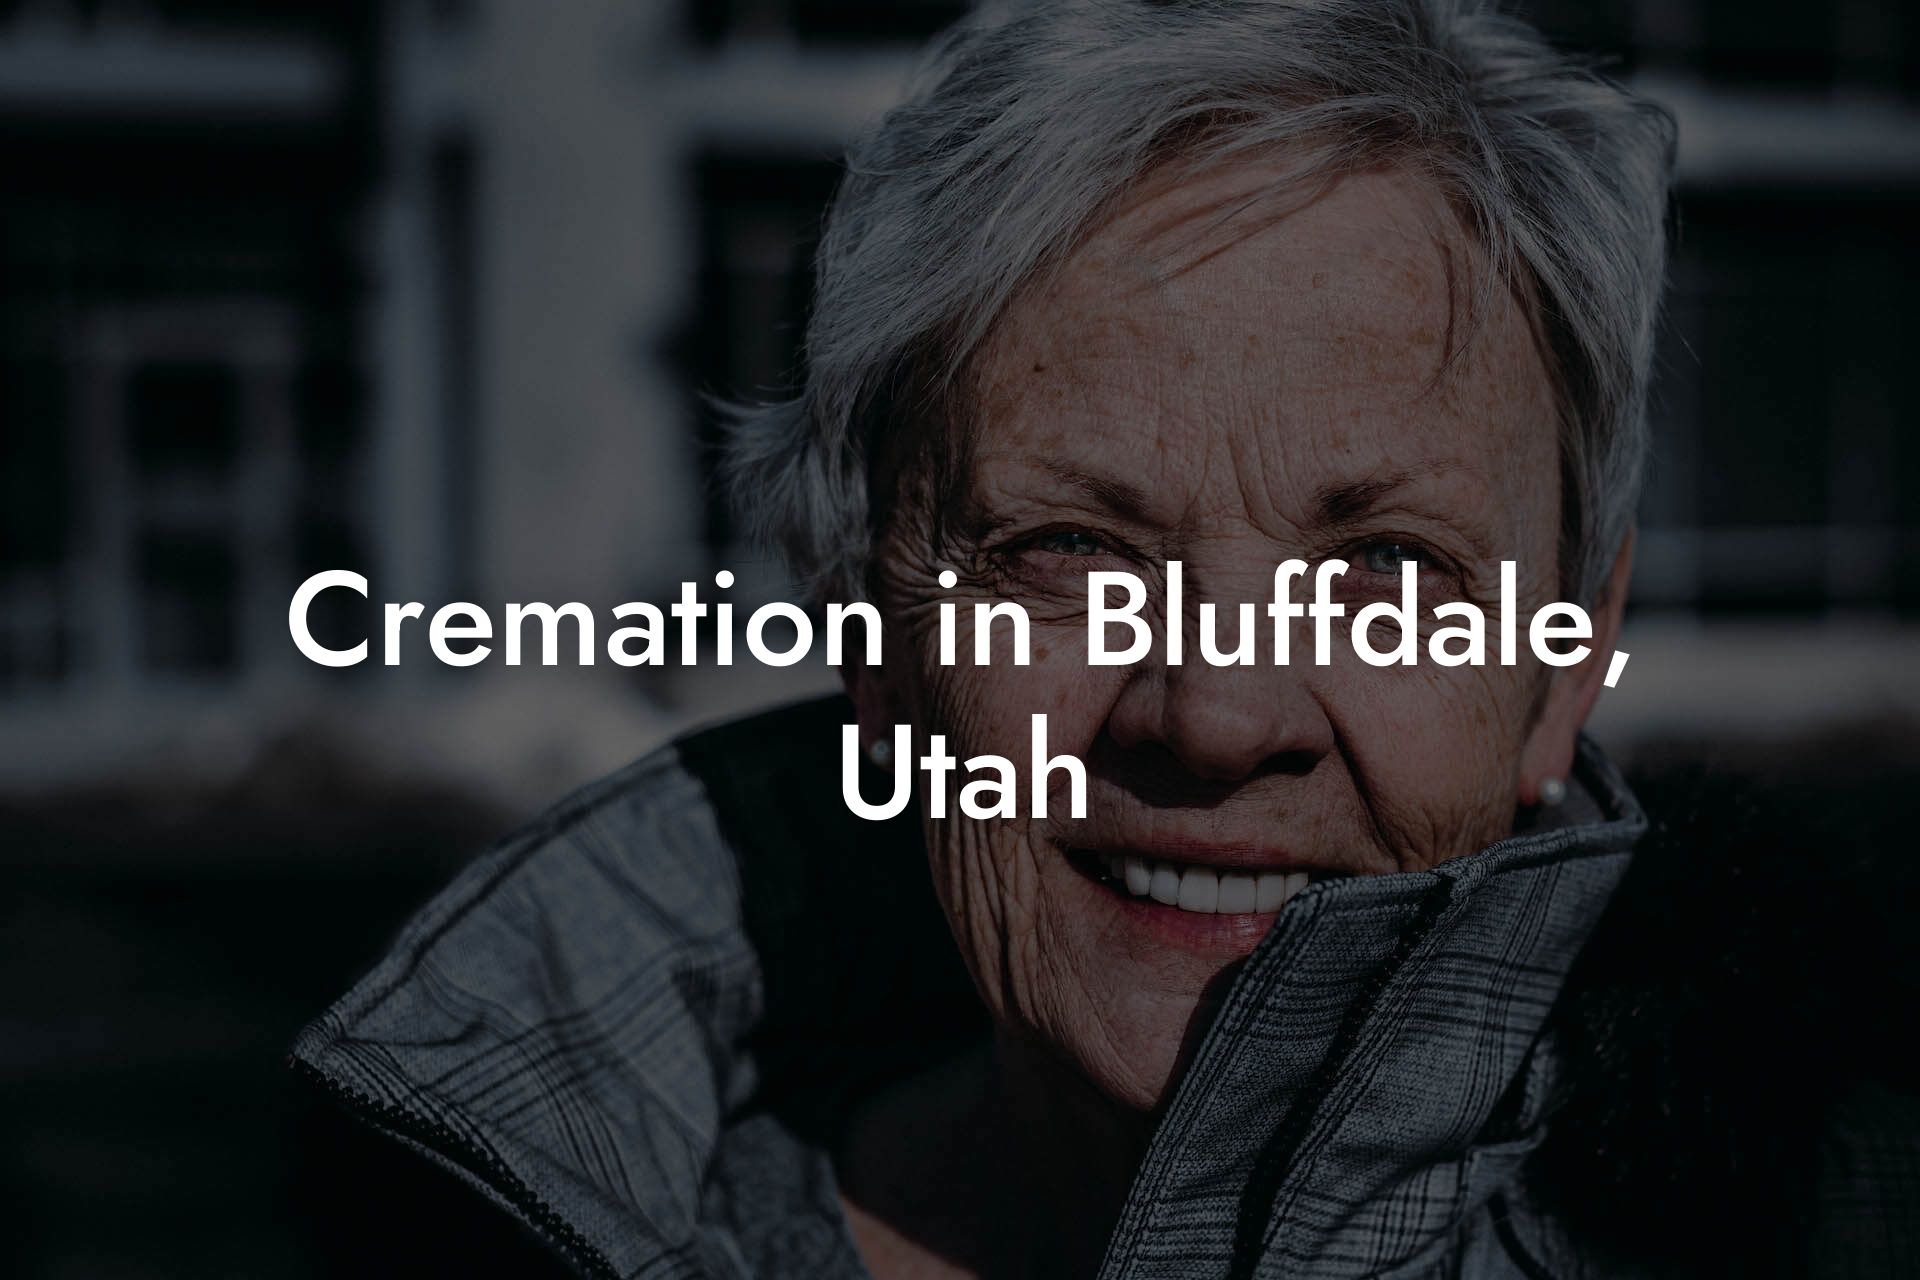 Cremation in Bluffdale, Utah